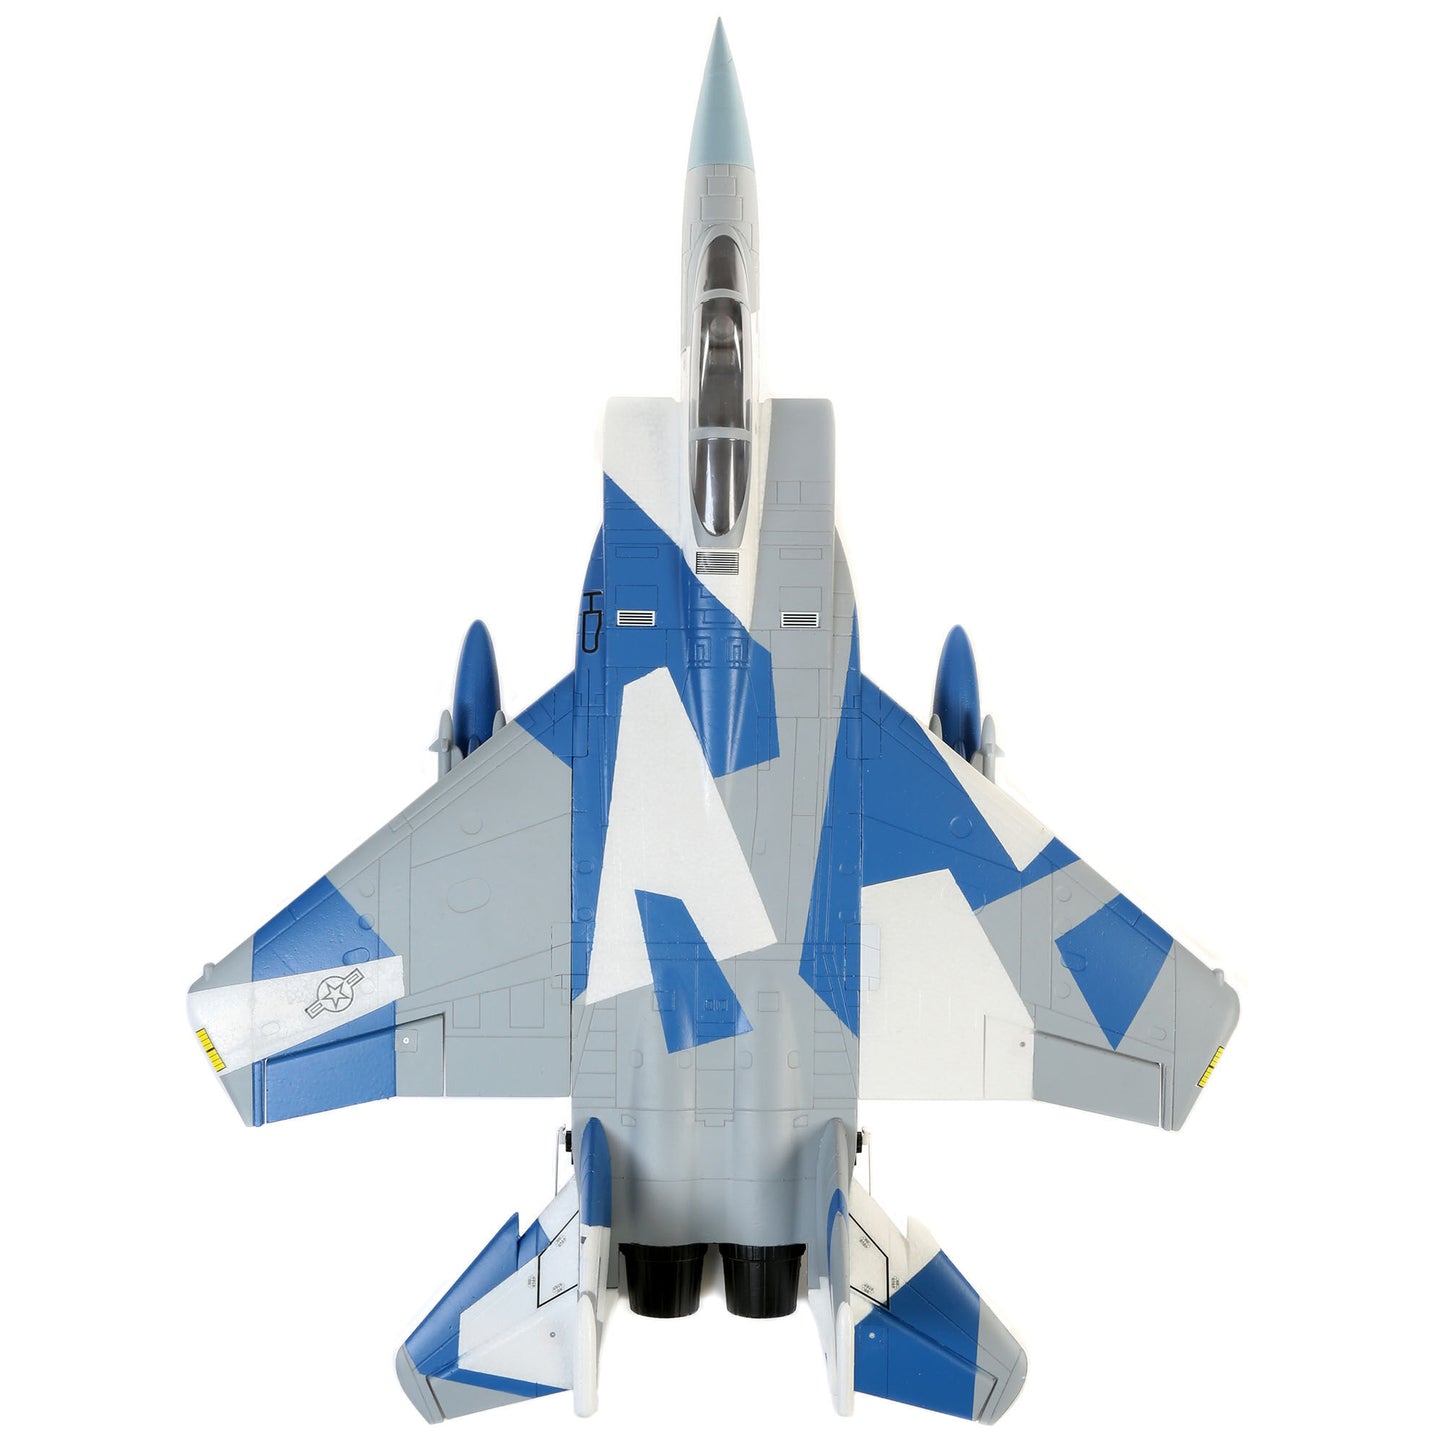 E-Flite F-15 Eagle 64mm EDF BNF Basic with AS3X and SAFE Select